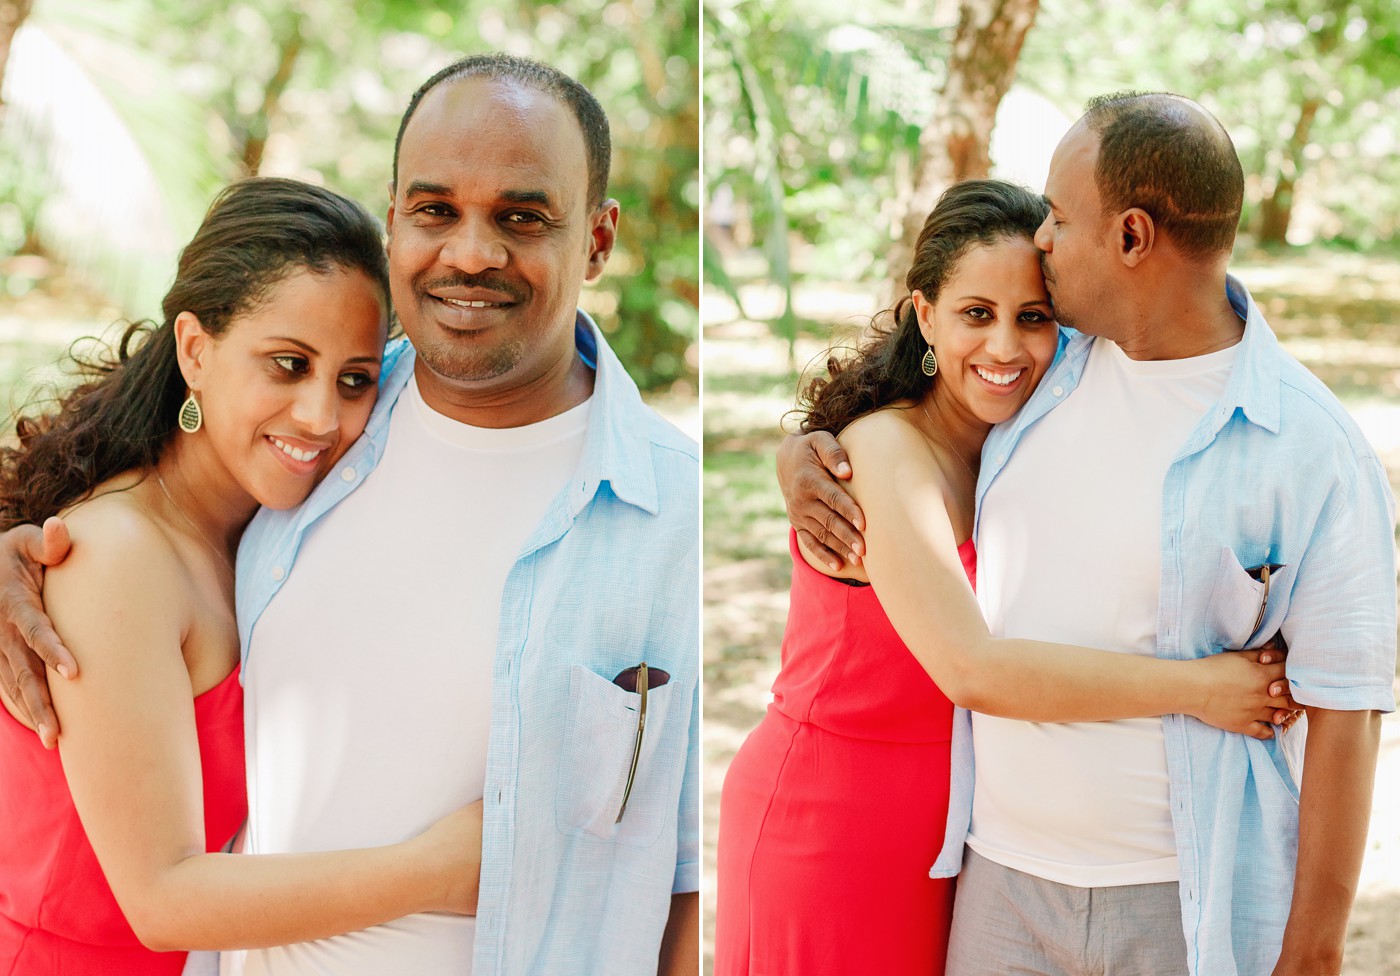 A casual engagement session with Kenyan's top wedding photographers.